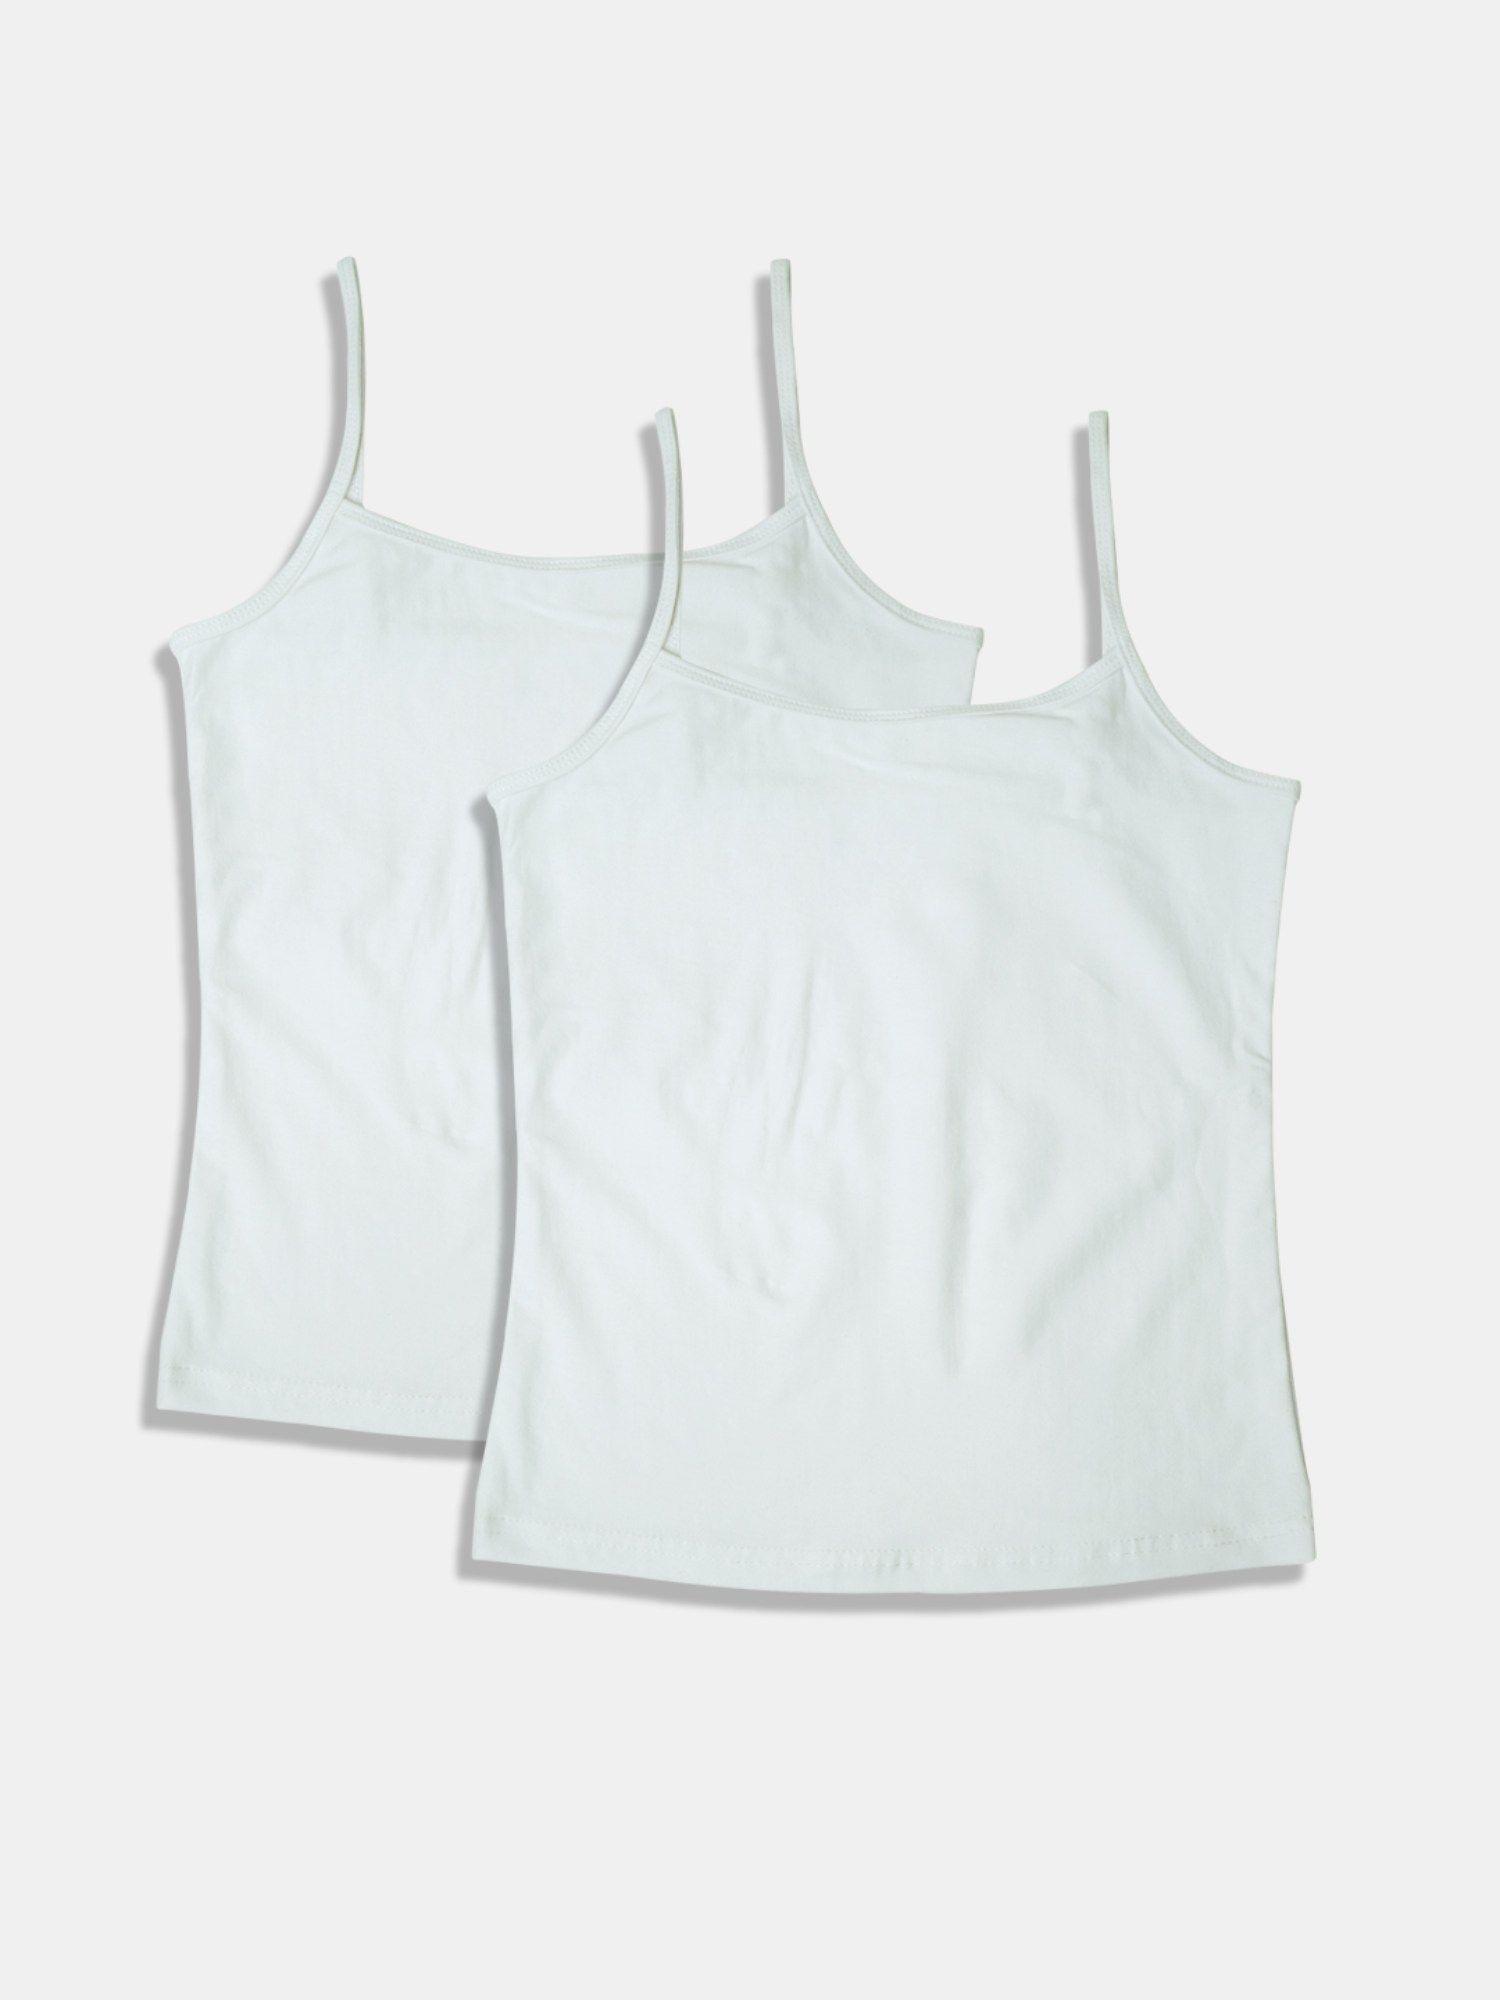 girls-white-camisoles-(pack-of-2)